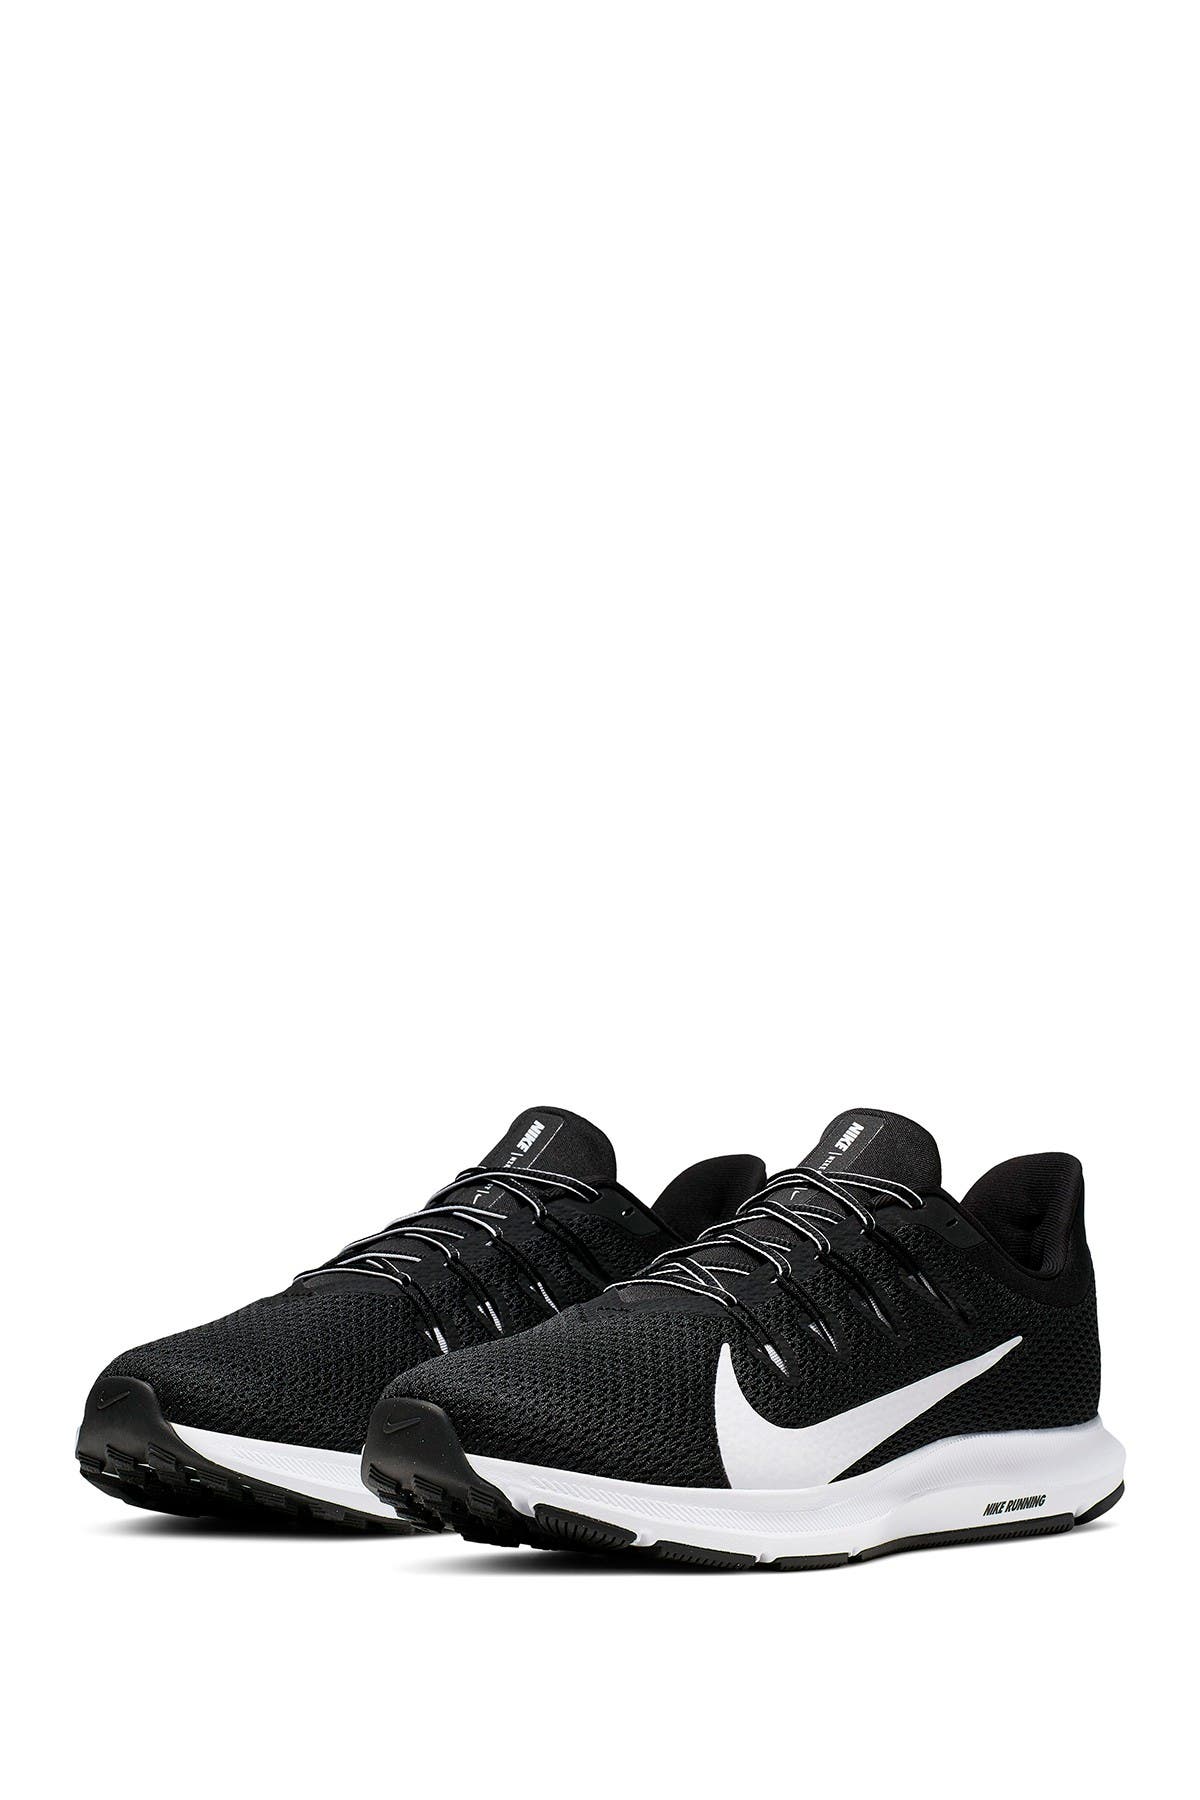 nike quest two